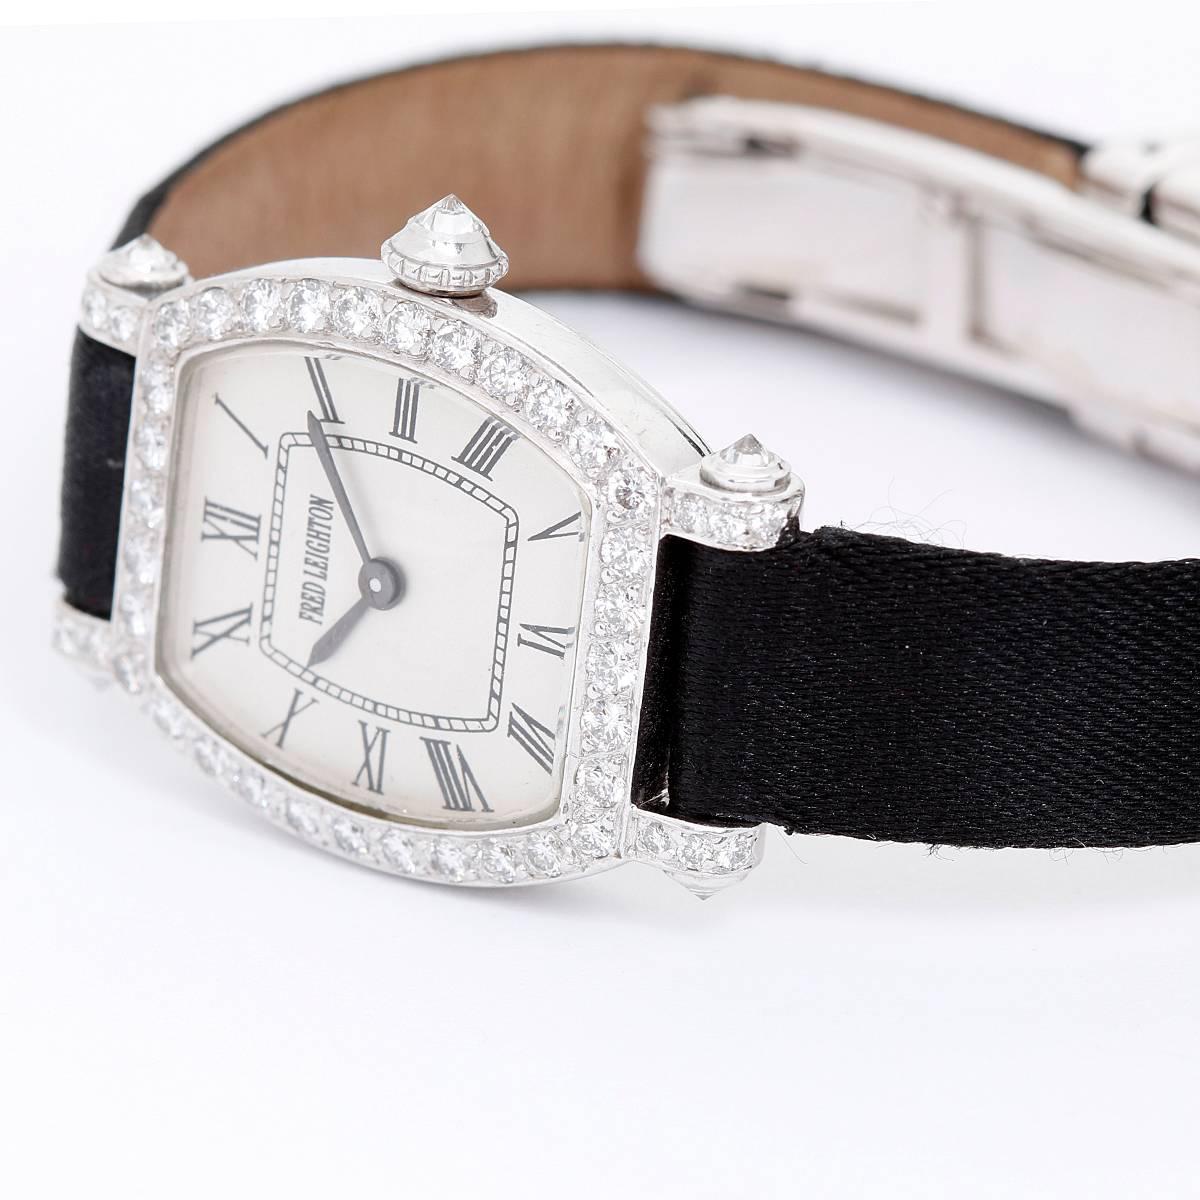 Fred Leighton by Charles Oudin Diamond Watch -  Quartz. 18K White Gold Tonneau case with 32 diamonds around bezel and on lugs ( 20 x 22 mm ). Enamel with Roman numerals. Black satin bracelet with diamond clasp. Pre-owned with custom box. Fits a 5